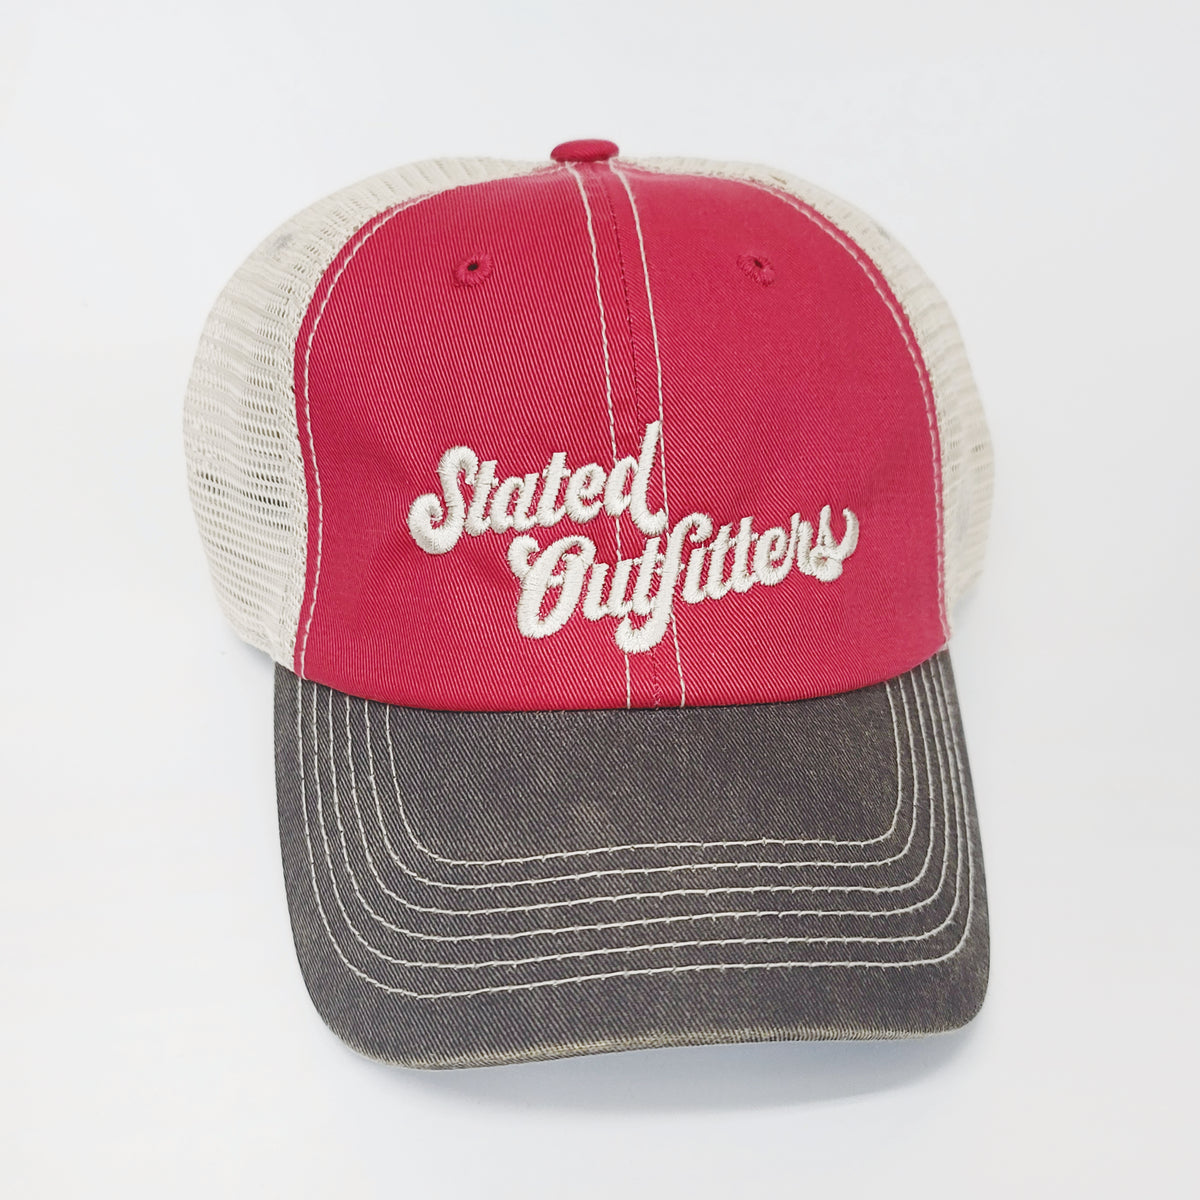 Stated Outfitters Embroidered Red Hat